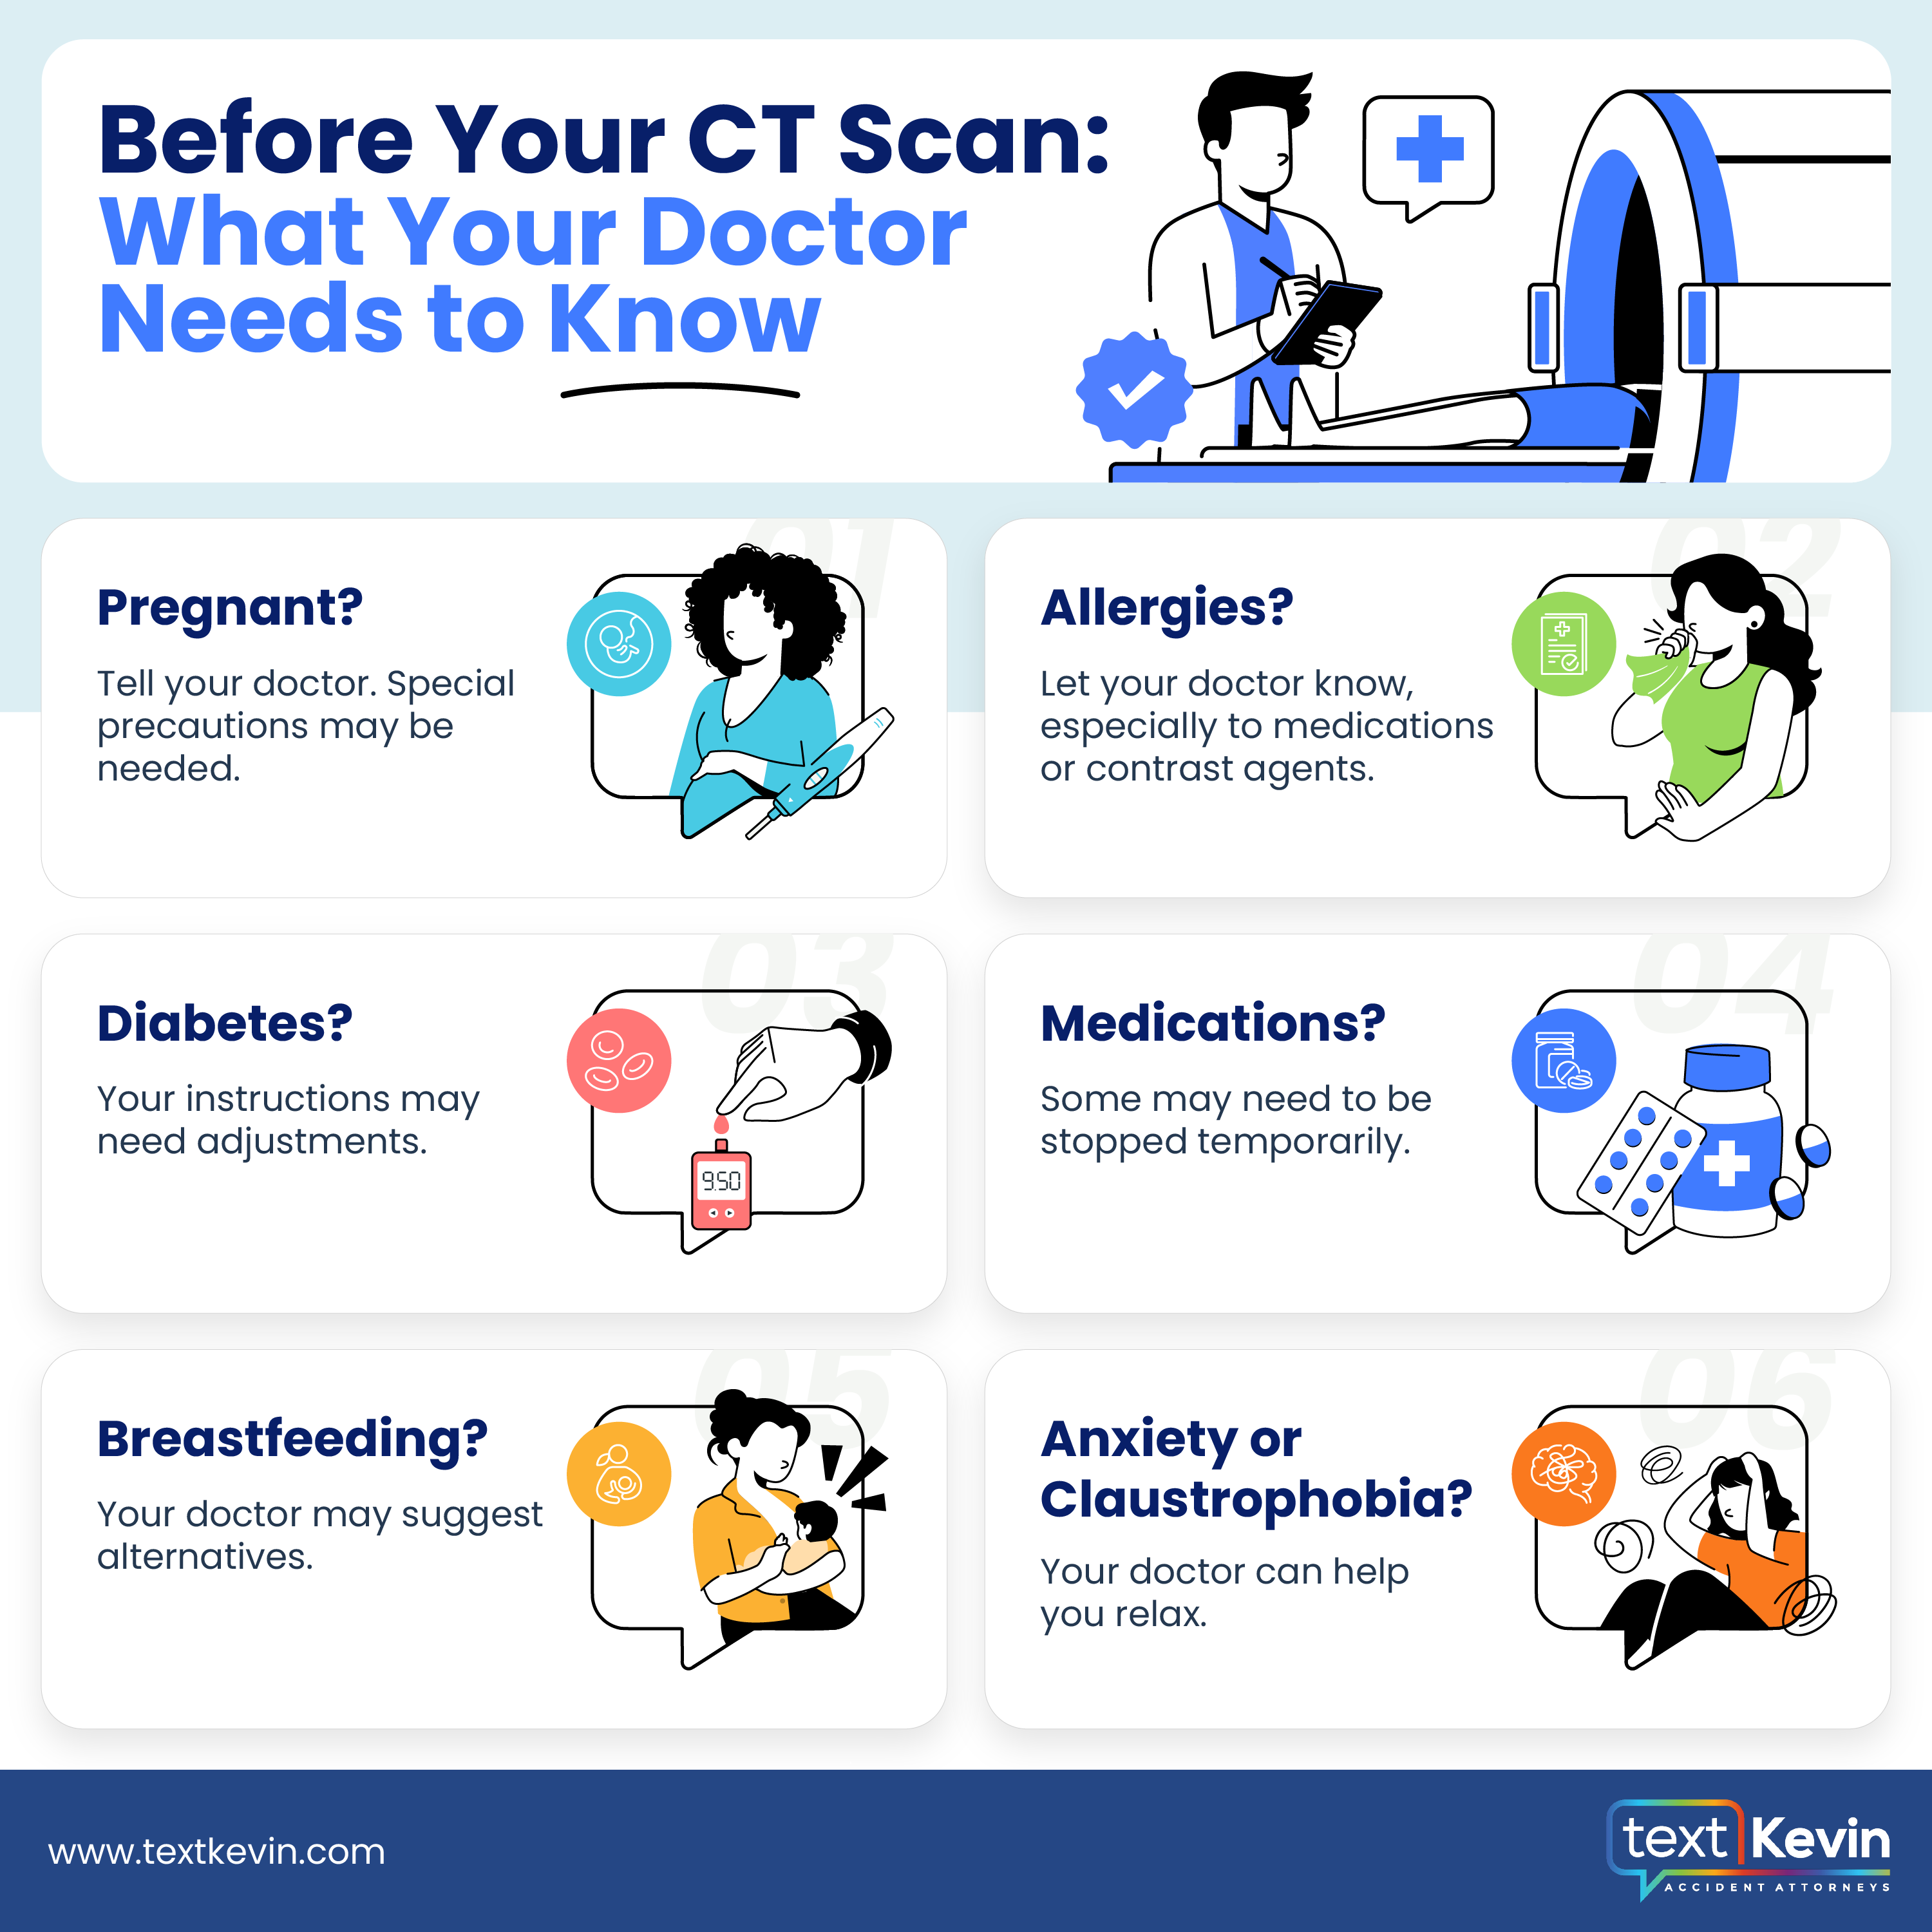 An infographic with a picture of a doctor and a CT scan machine representing what a patient should disclose to a doctor before a CT scan